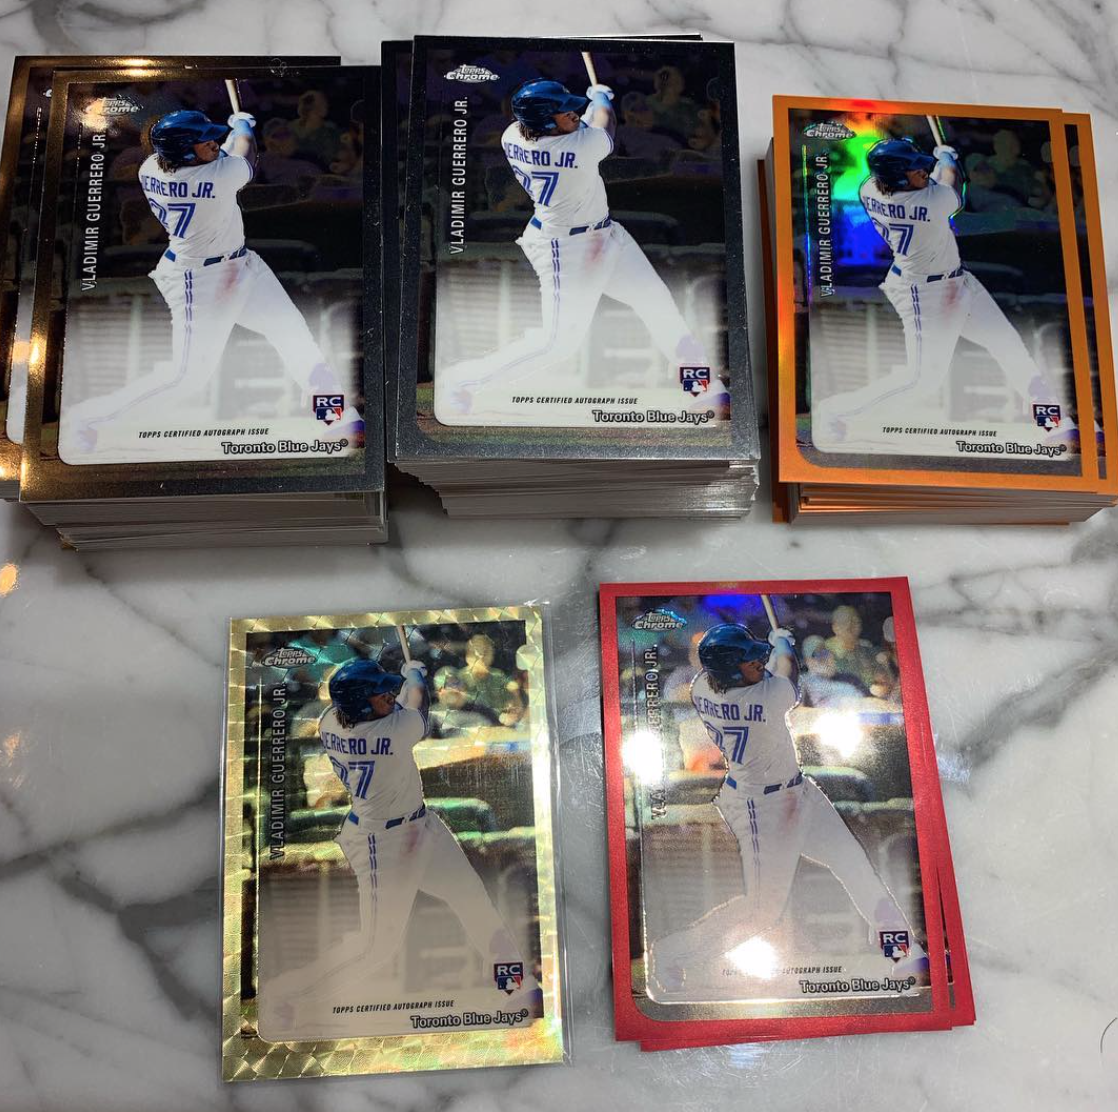 Stacks of Vlad Jr. sports cards (2019 Topps Chrome - Rookie Variation Auto (Possible 20th Anniversary Insert Auto?) & Dual Autos) on a marble countertop